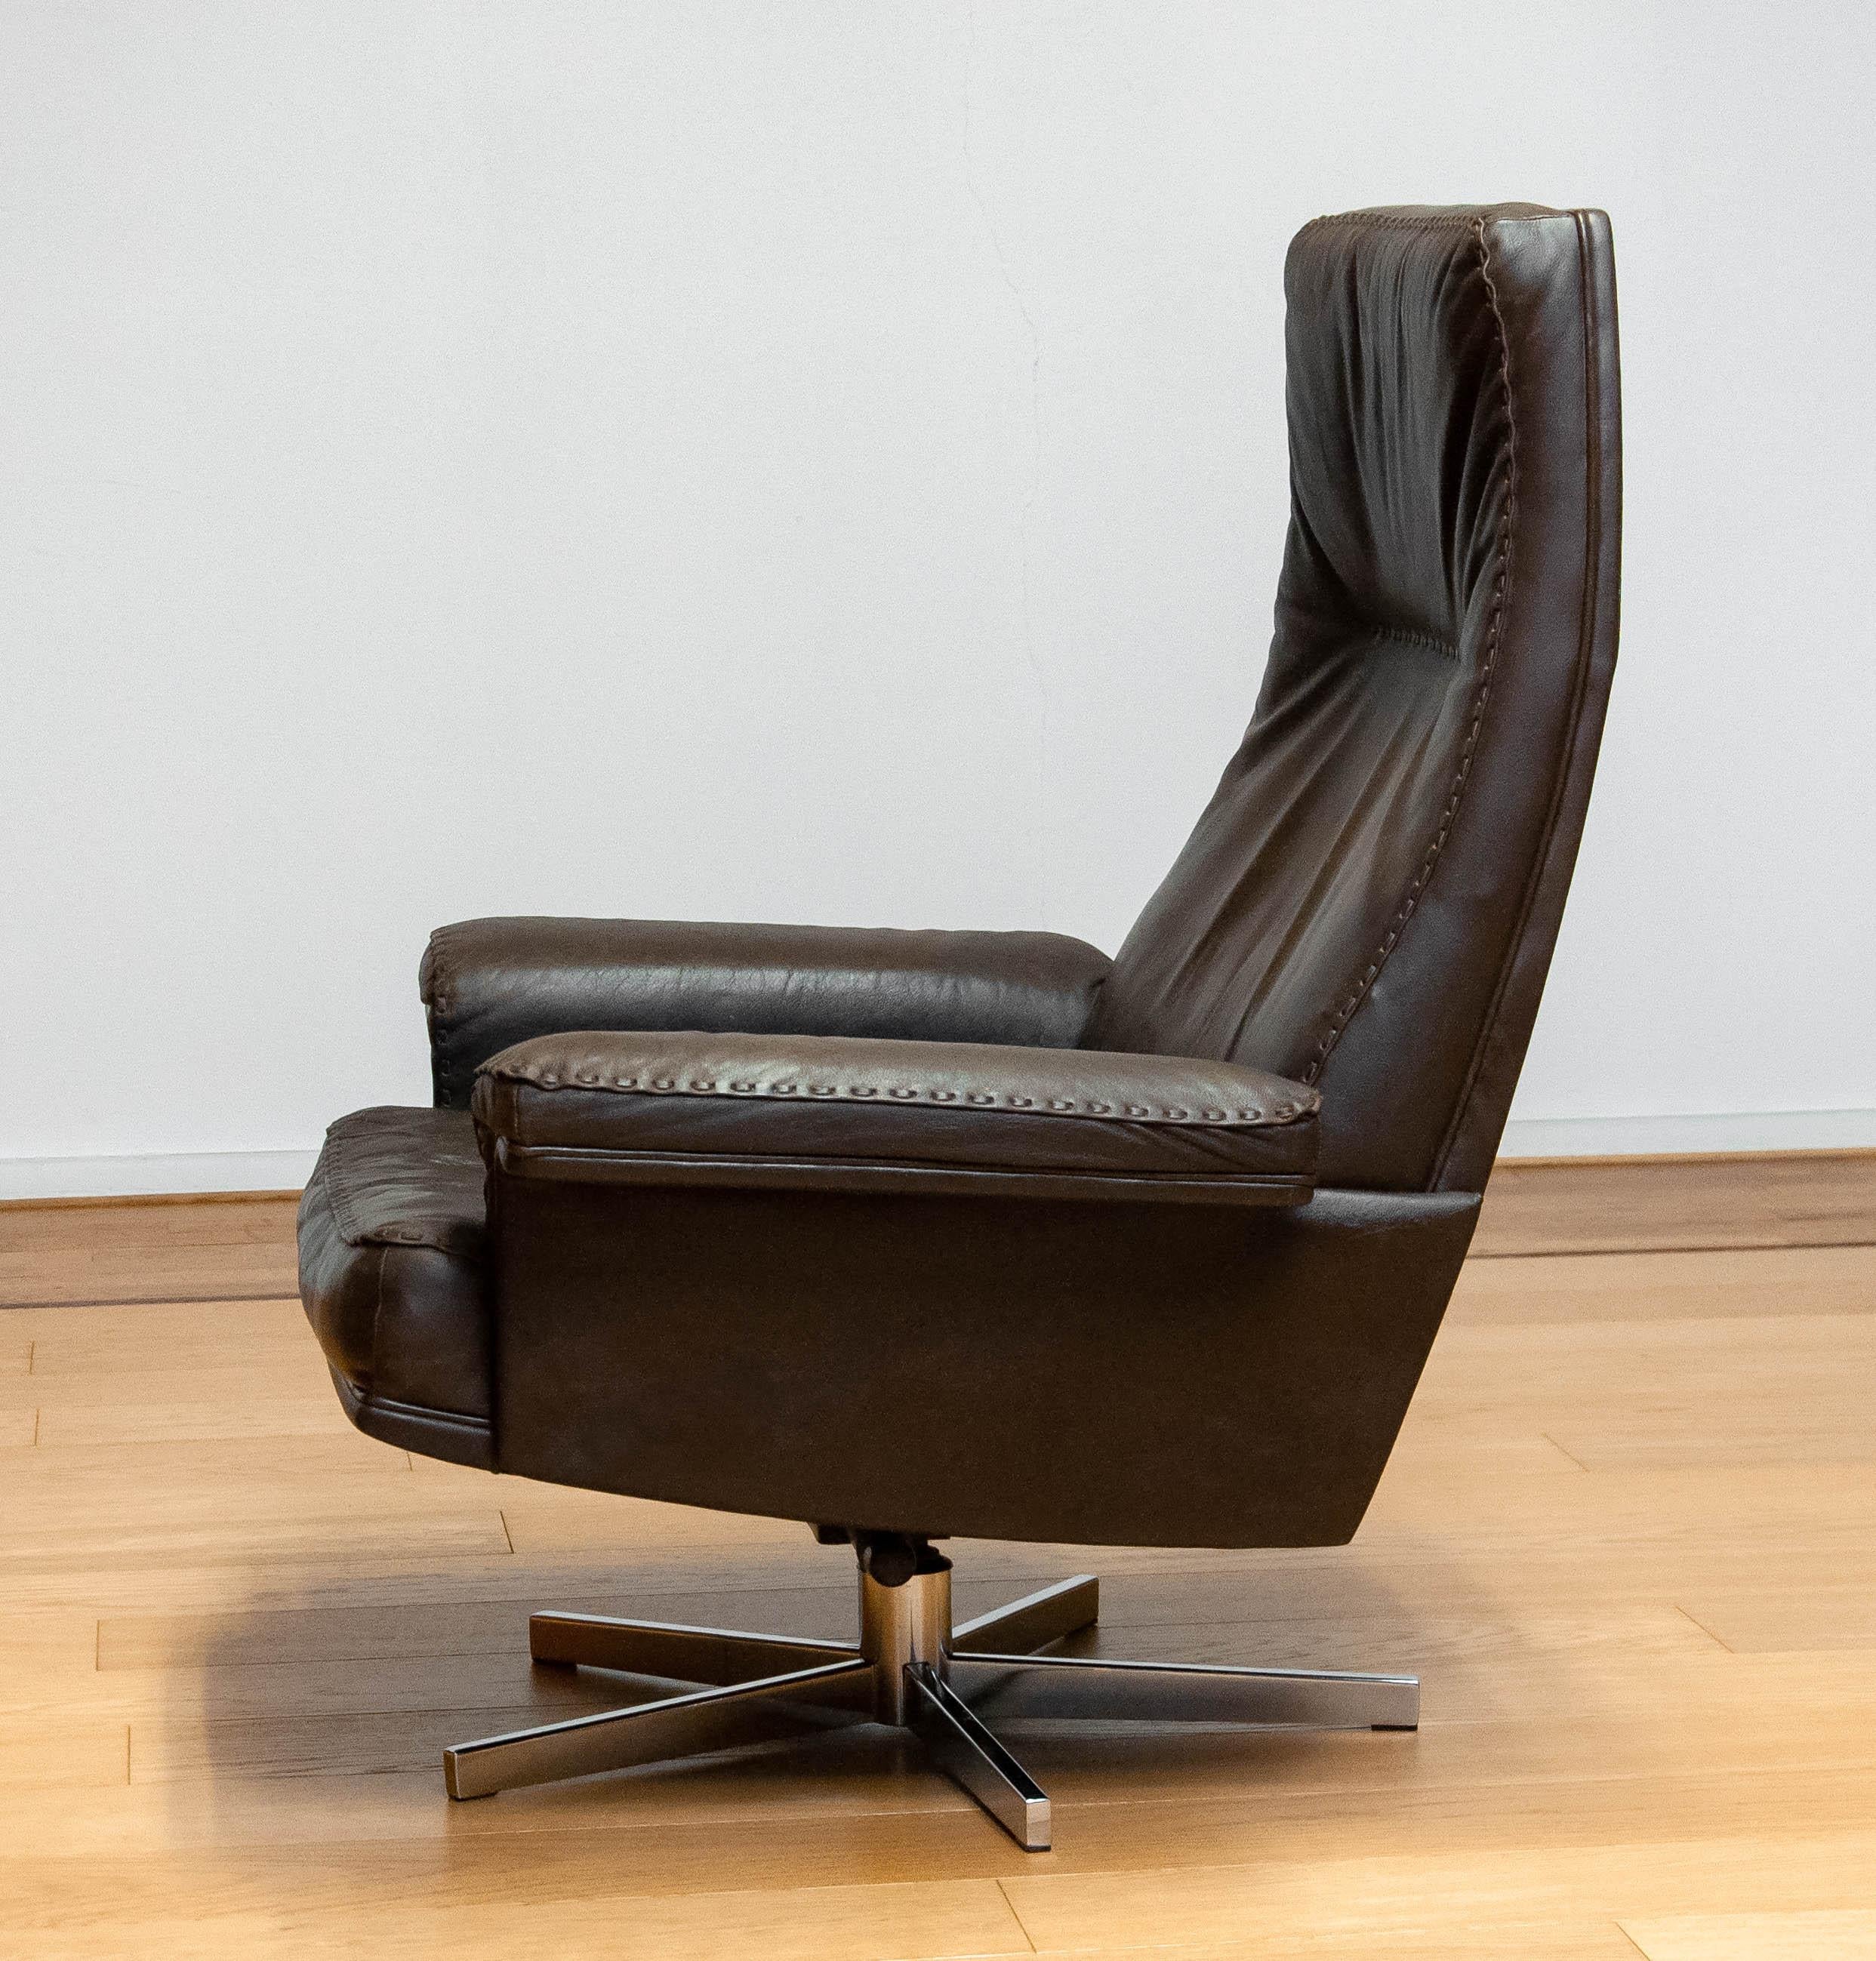 Swiss 1970s Handstitched Brown Leather Swivel Chair with Chrome Base by De Sede DS-35